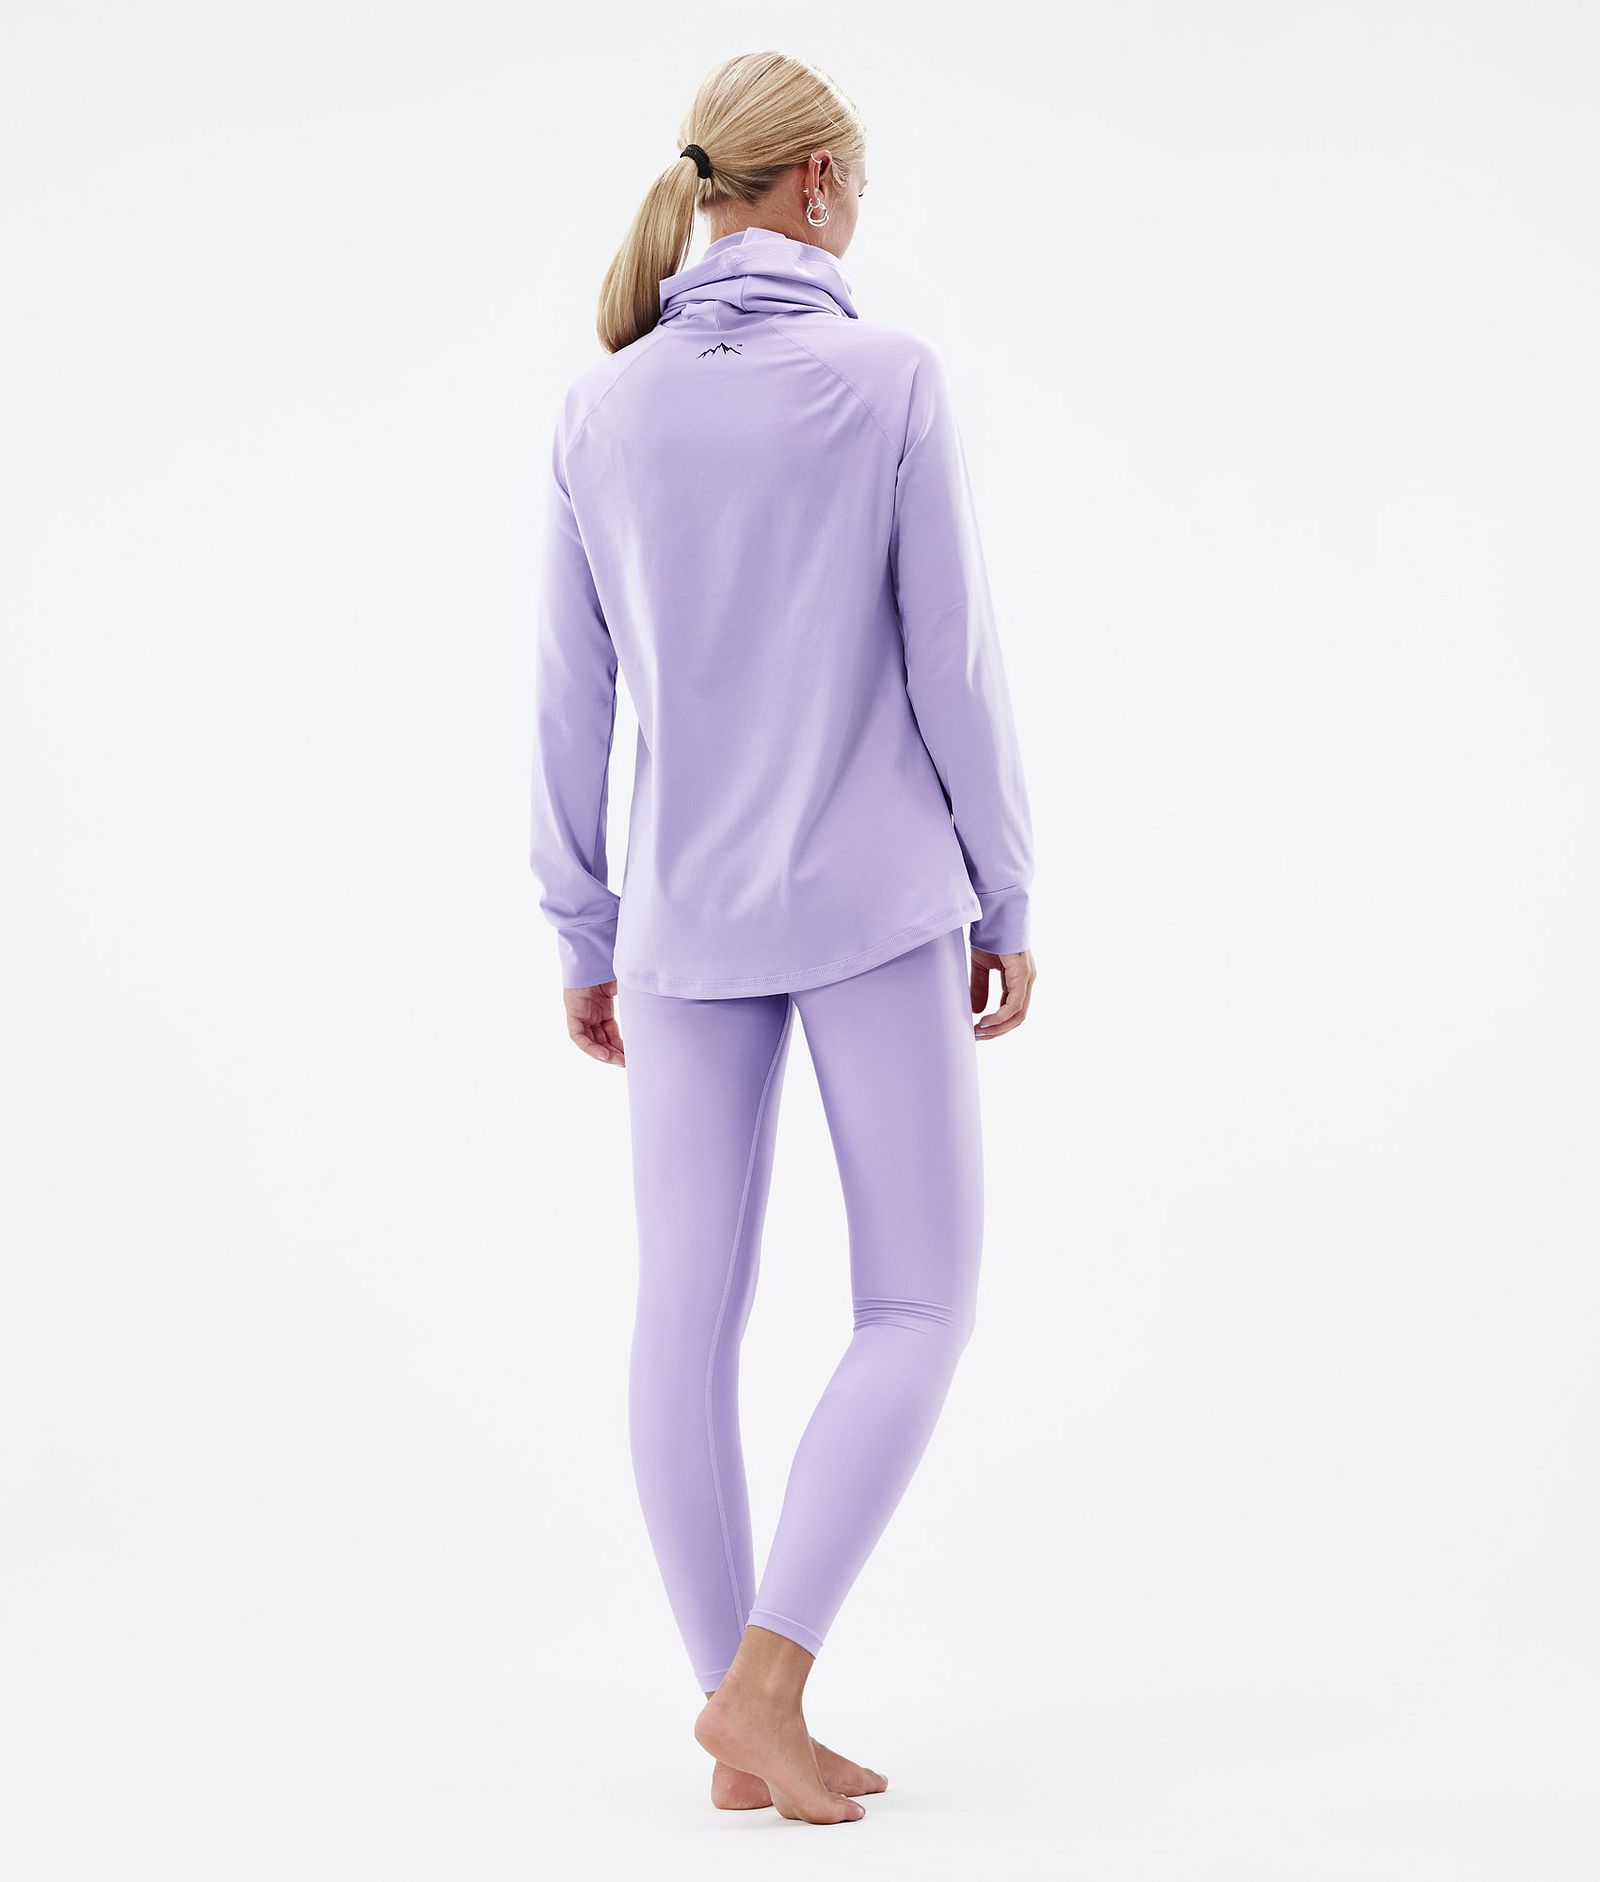 Snuggle W 2022 Base Layer Pant Women 2X-Up Faded Violet, Image 4 of 7